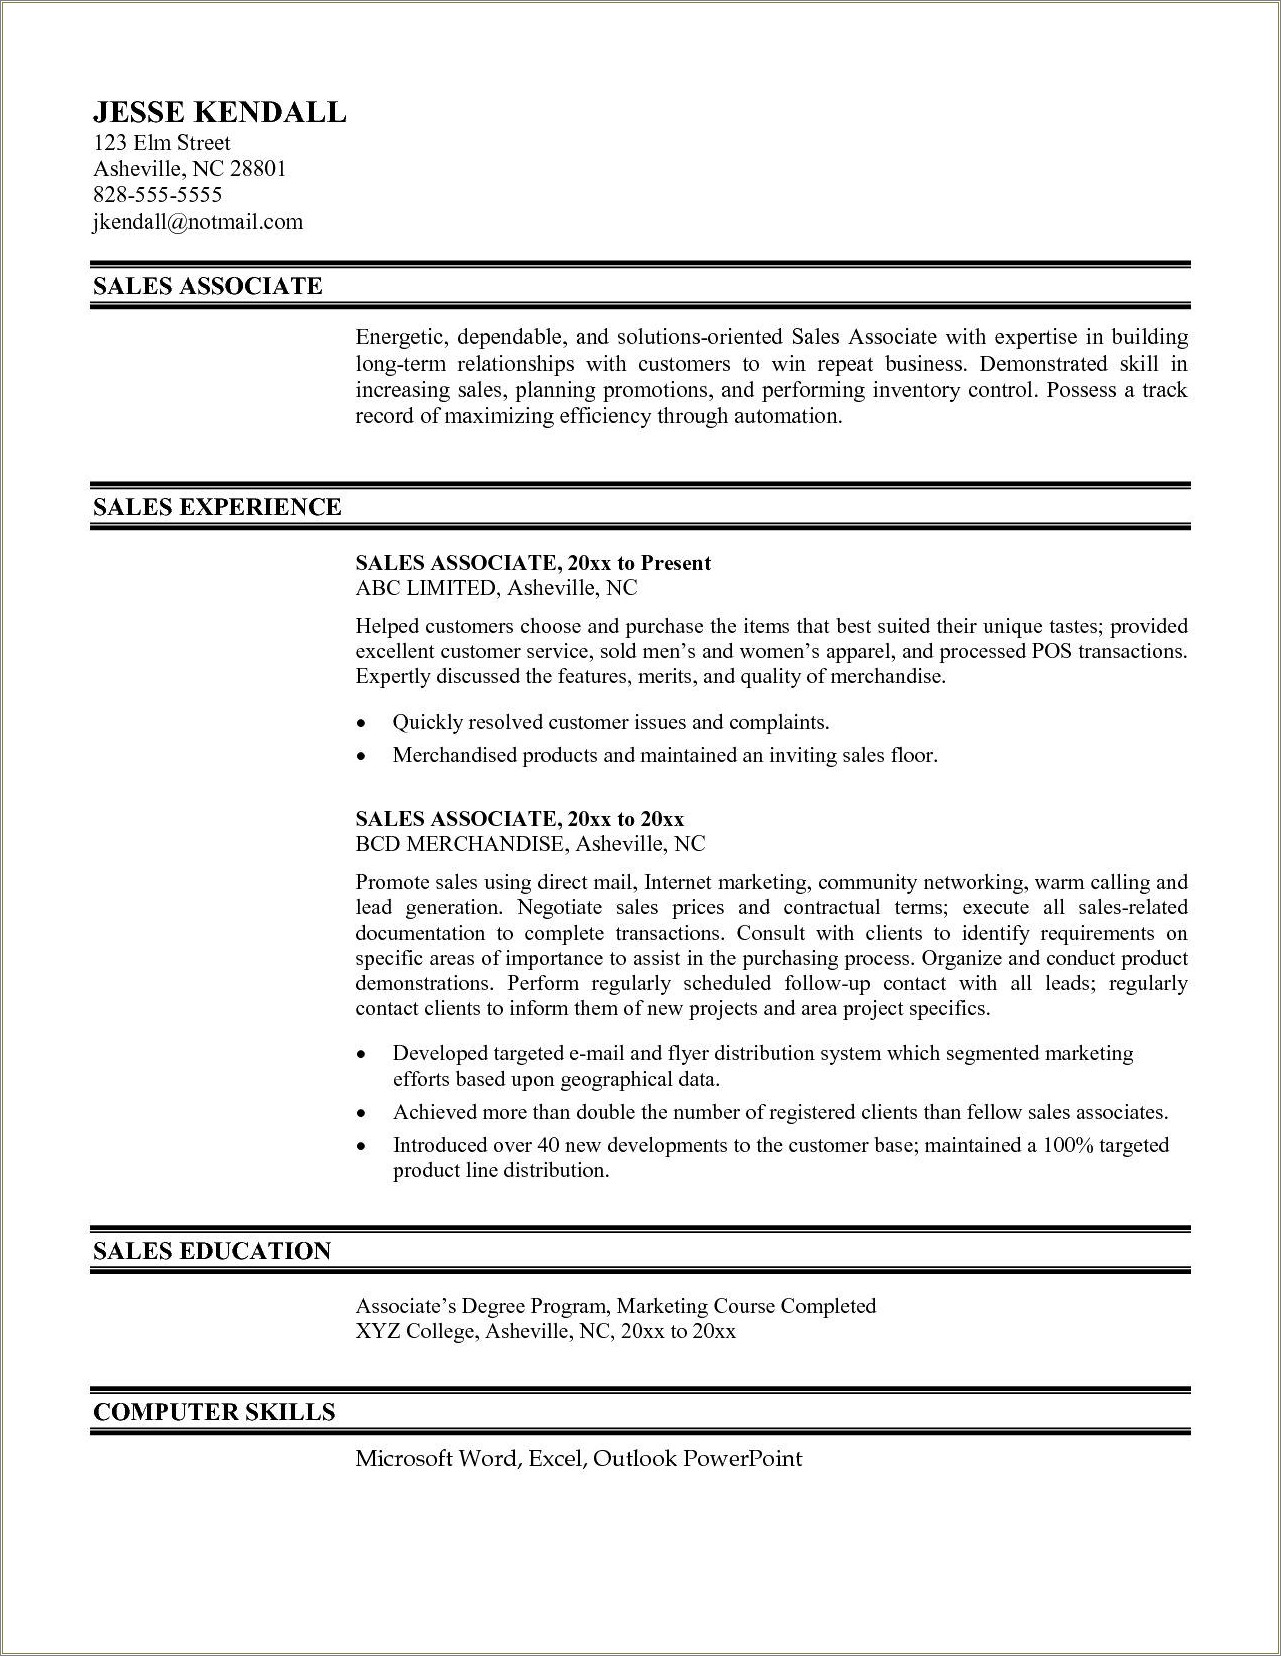 Example Of Objective On Resume For Retail